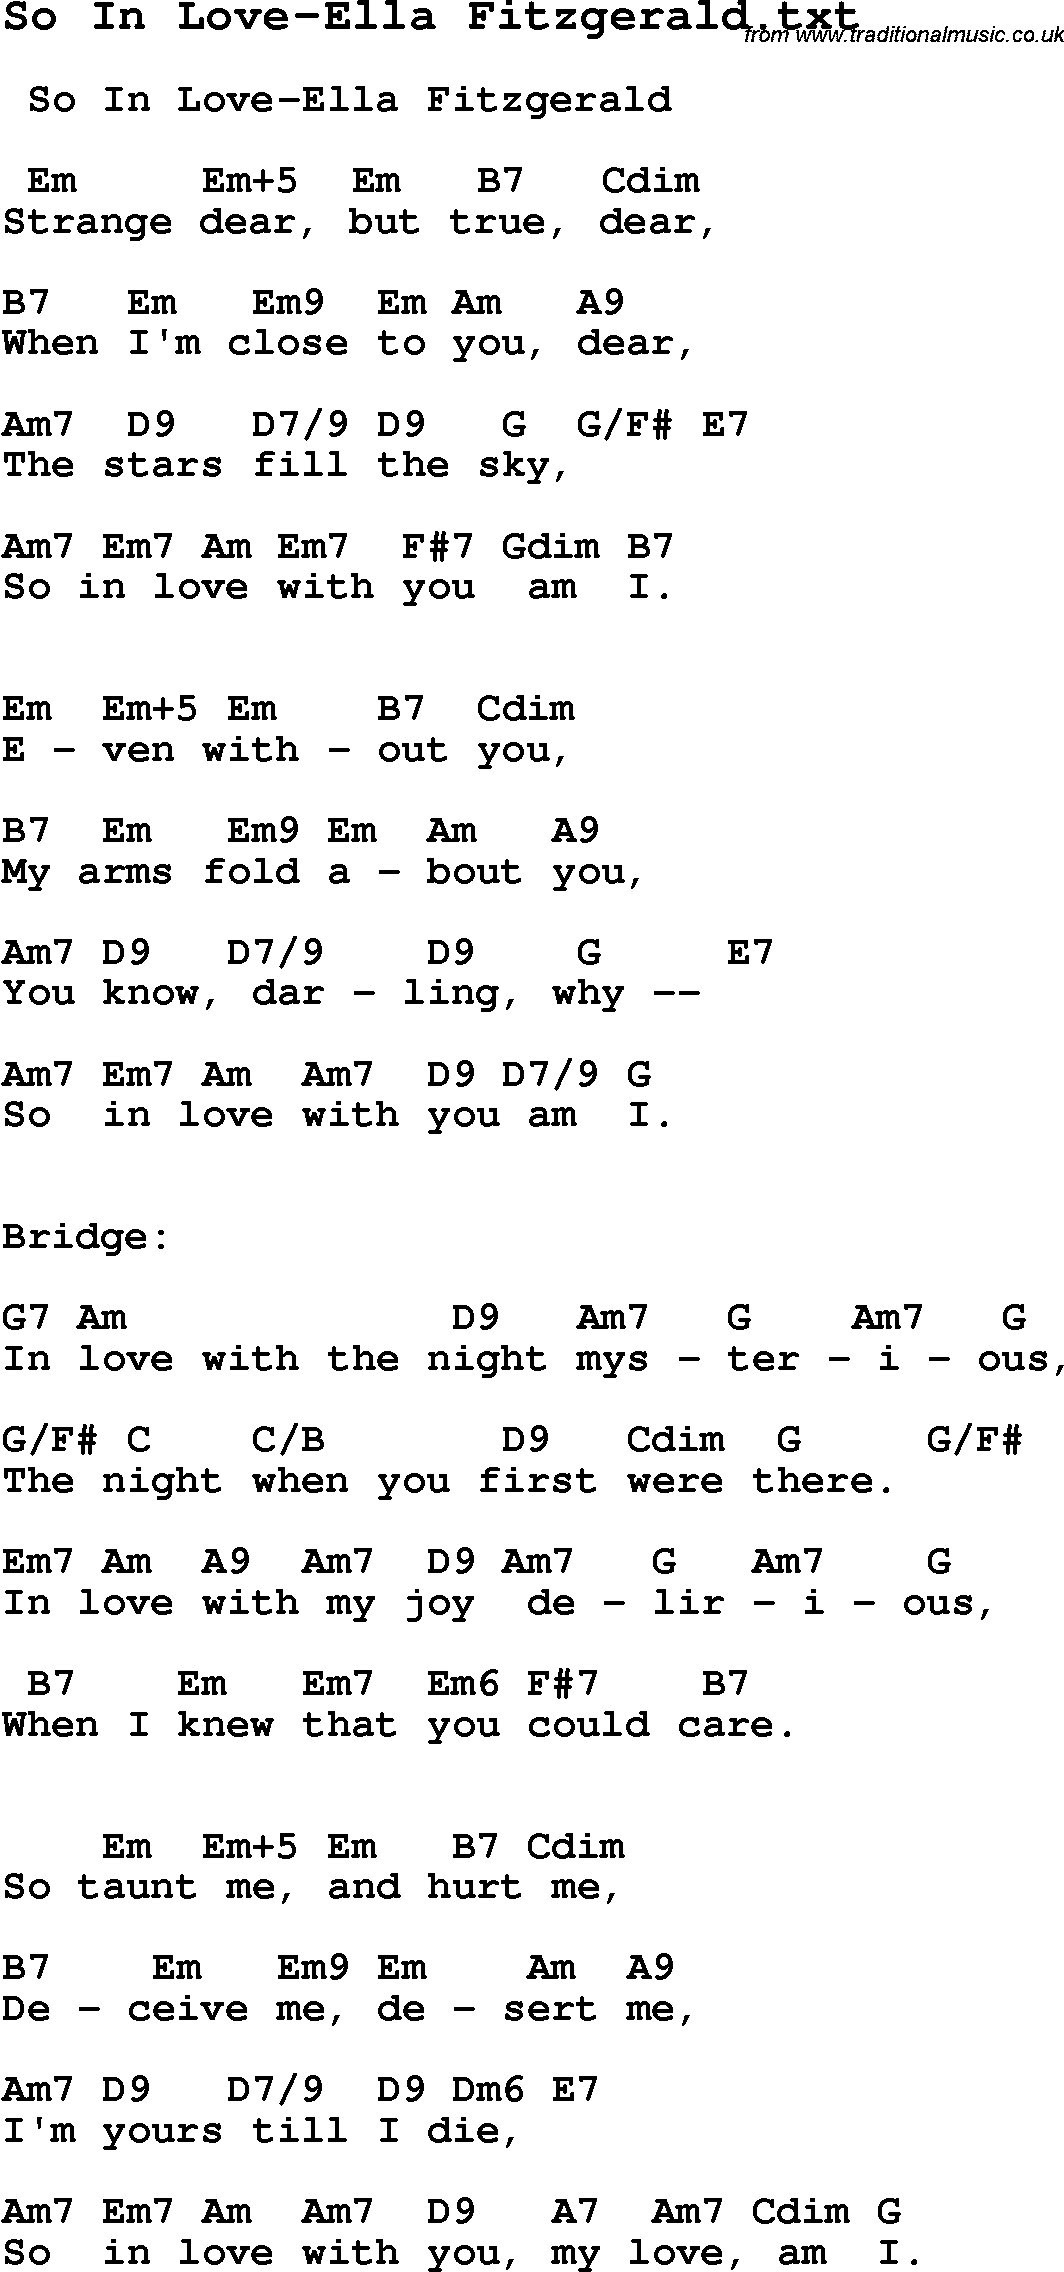 Jazz Song from top bands and vocal artists with chords, tabs and lyrics - So In Love-Ella Fitzgerald